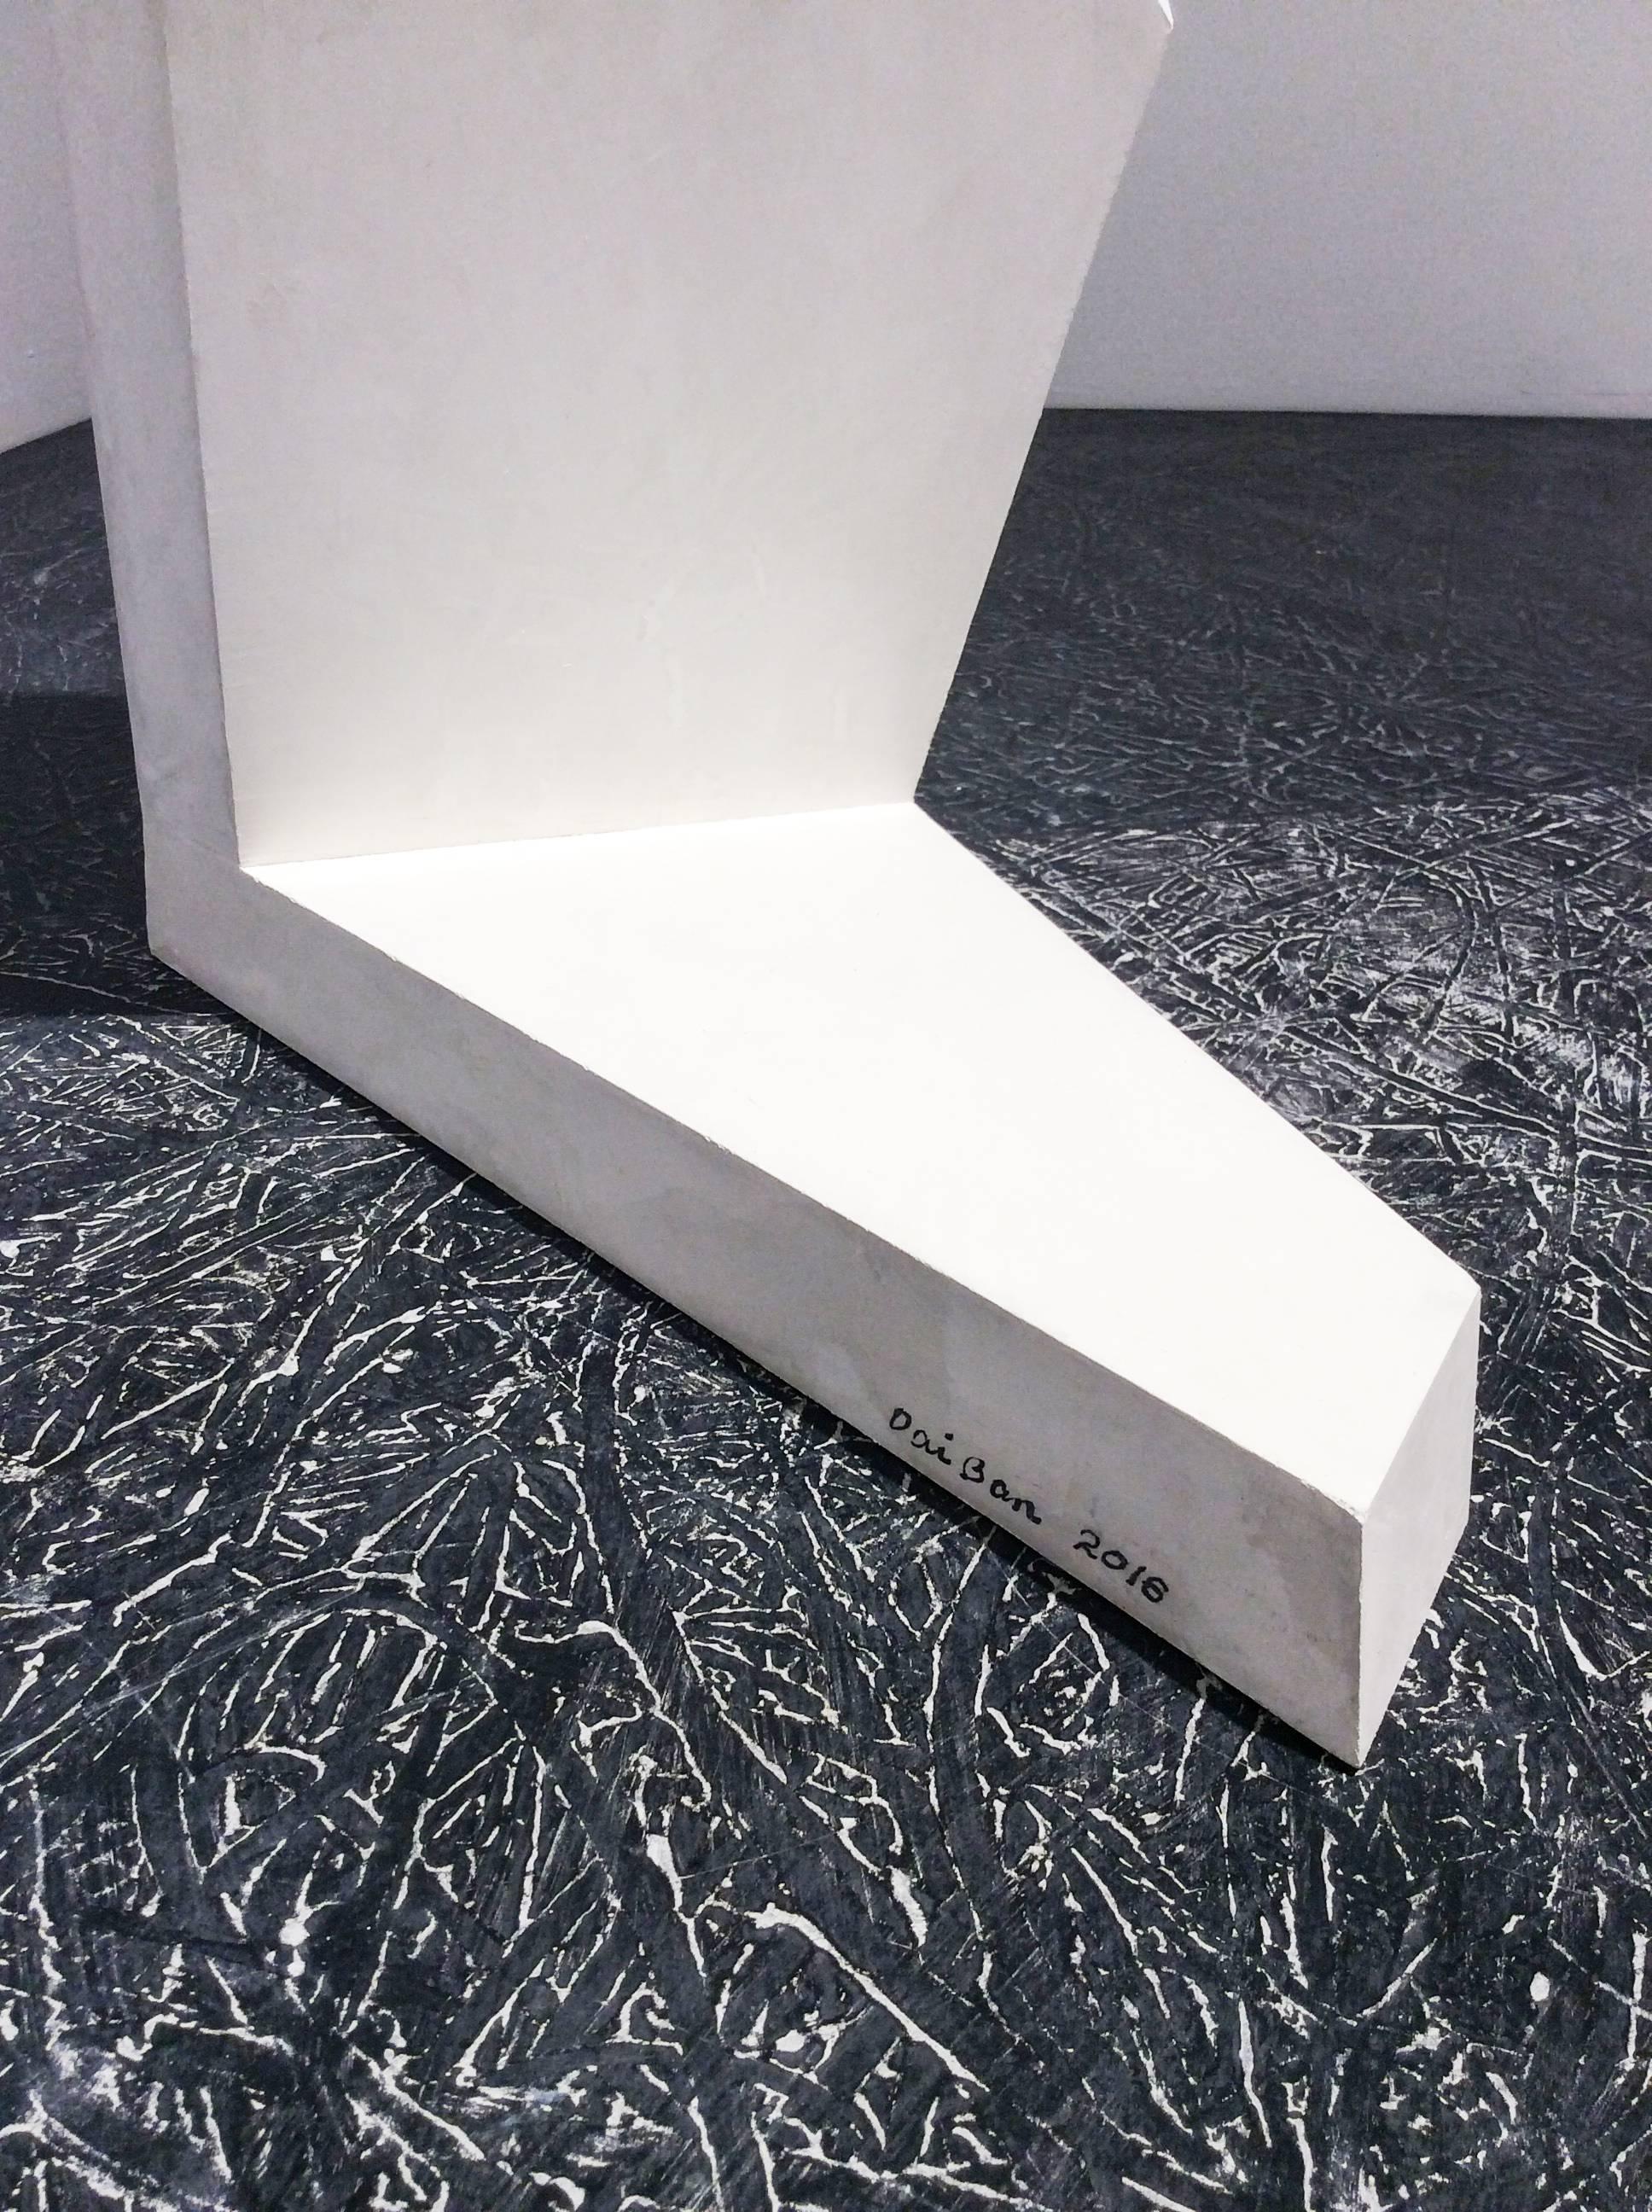 34 x 15 x 9 inches
carved precision board, acrylic and Venetian plaster 

This contemporary, abstract minimalist free-standing sculpture was made by Japanese artist, Dai Ban in 2016. The elegant minimalist sculpture is incredibly lightweight and has